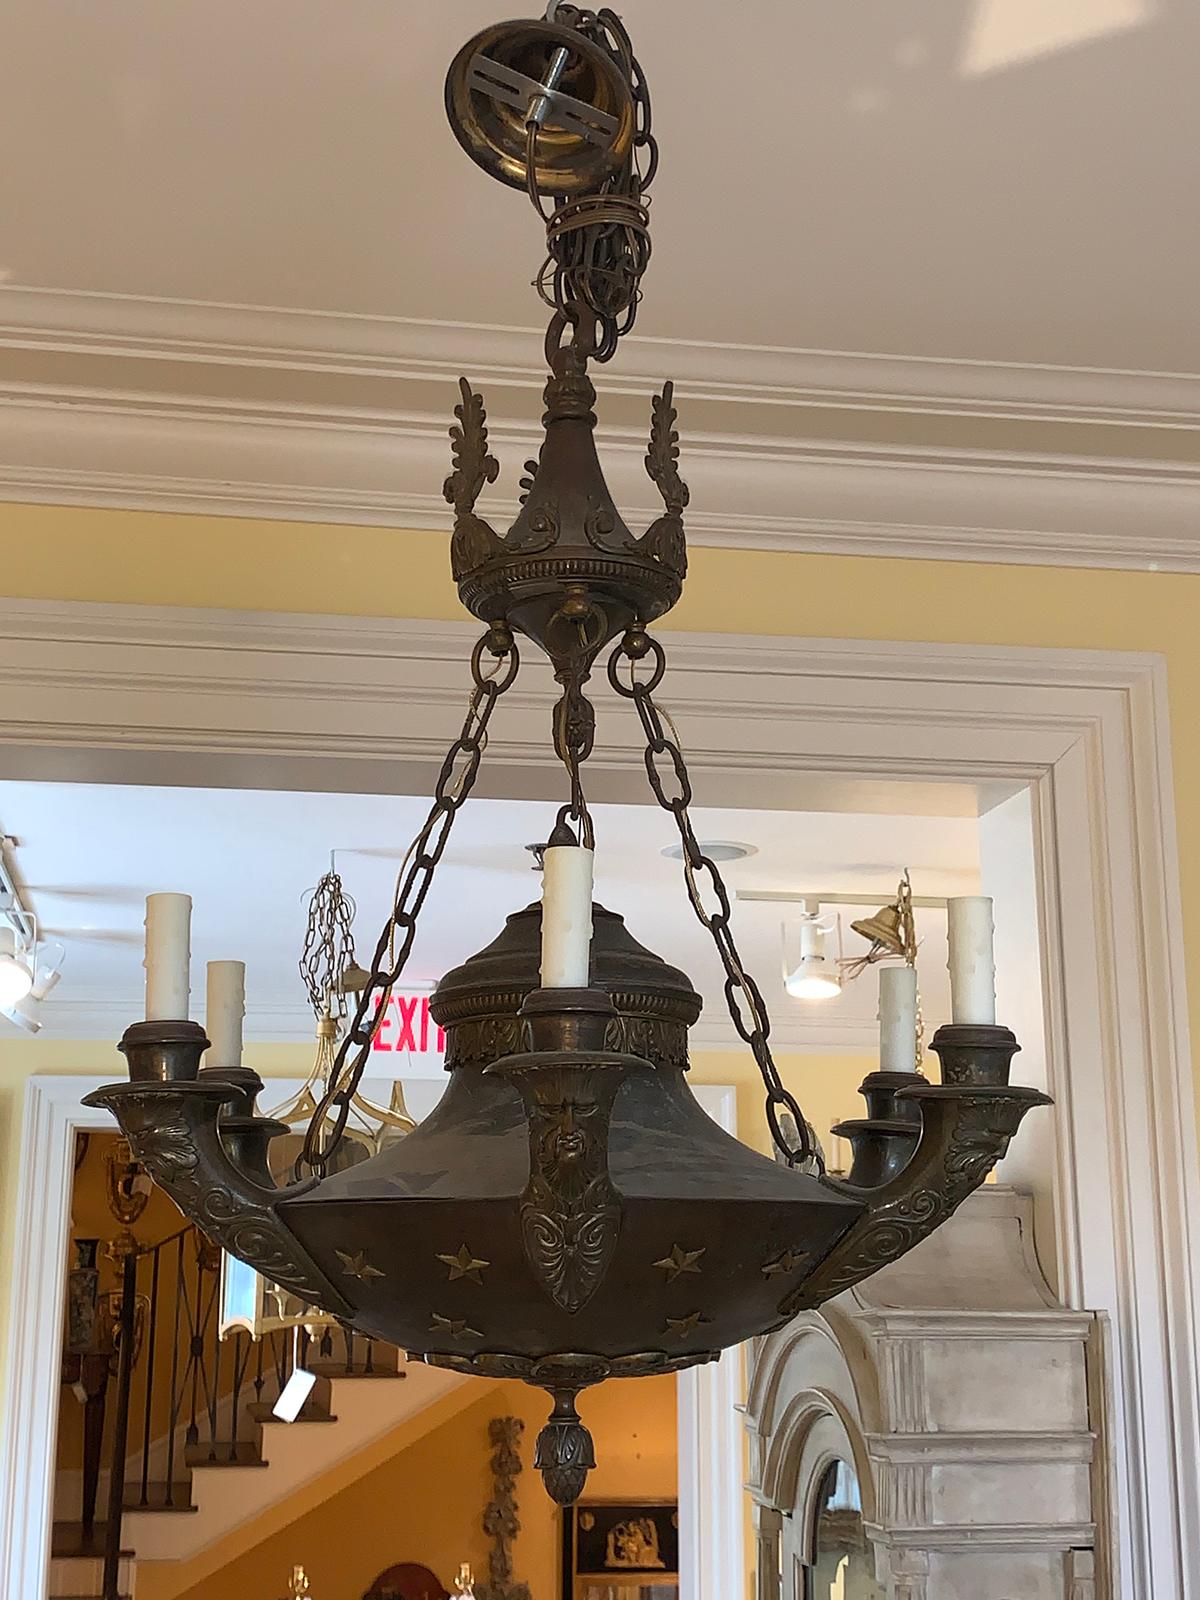 19th century Empire style six-arm chandelier with faces
New wiring.